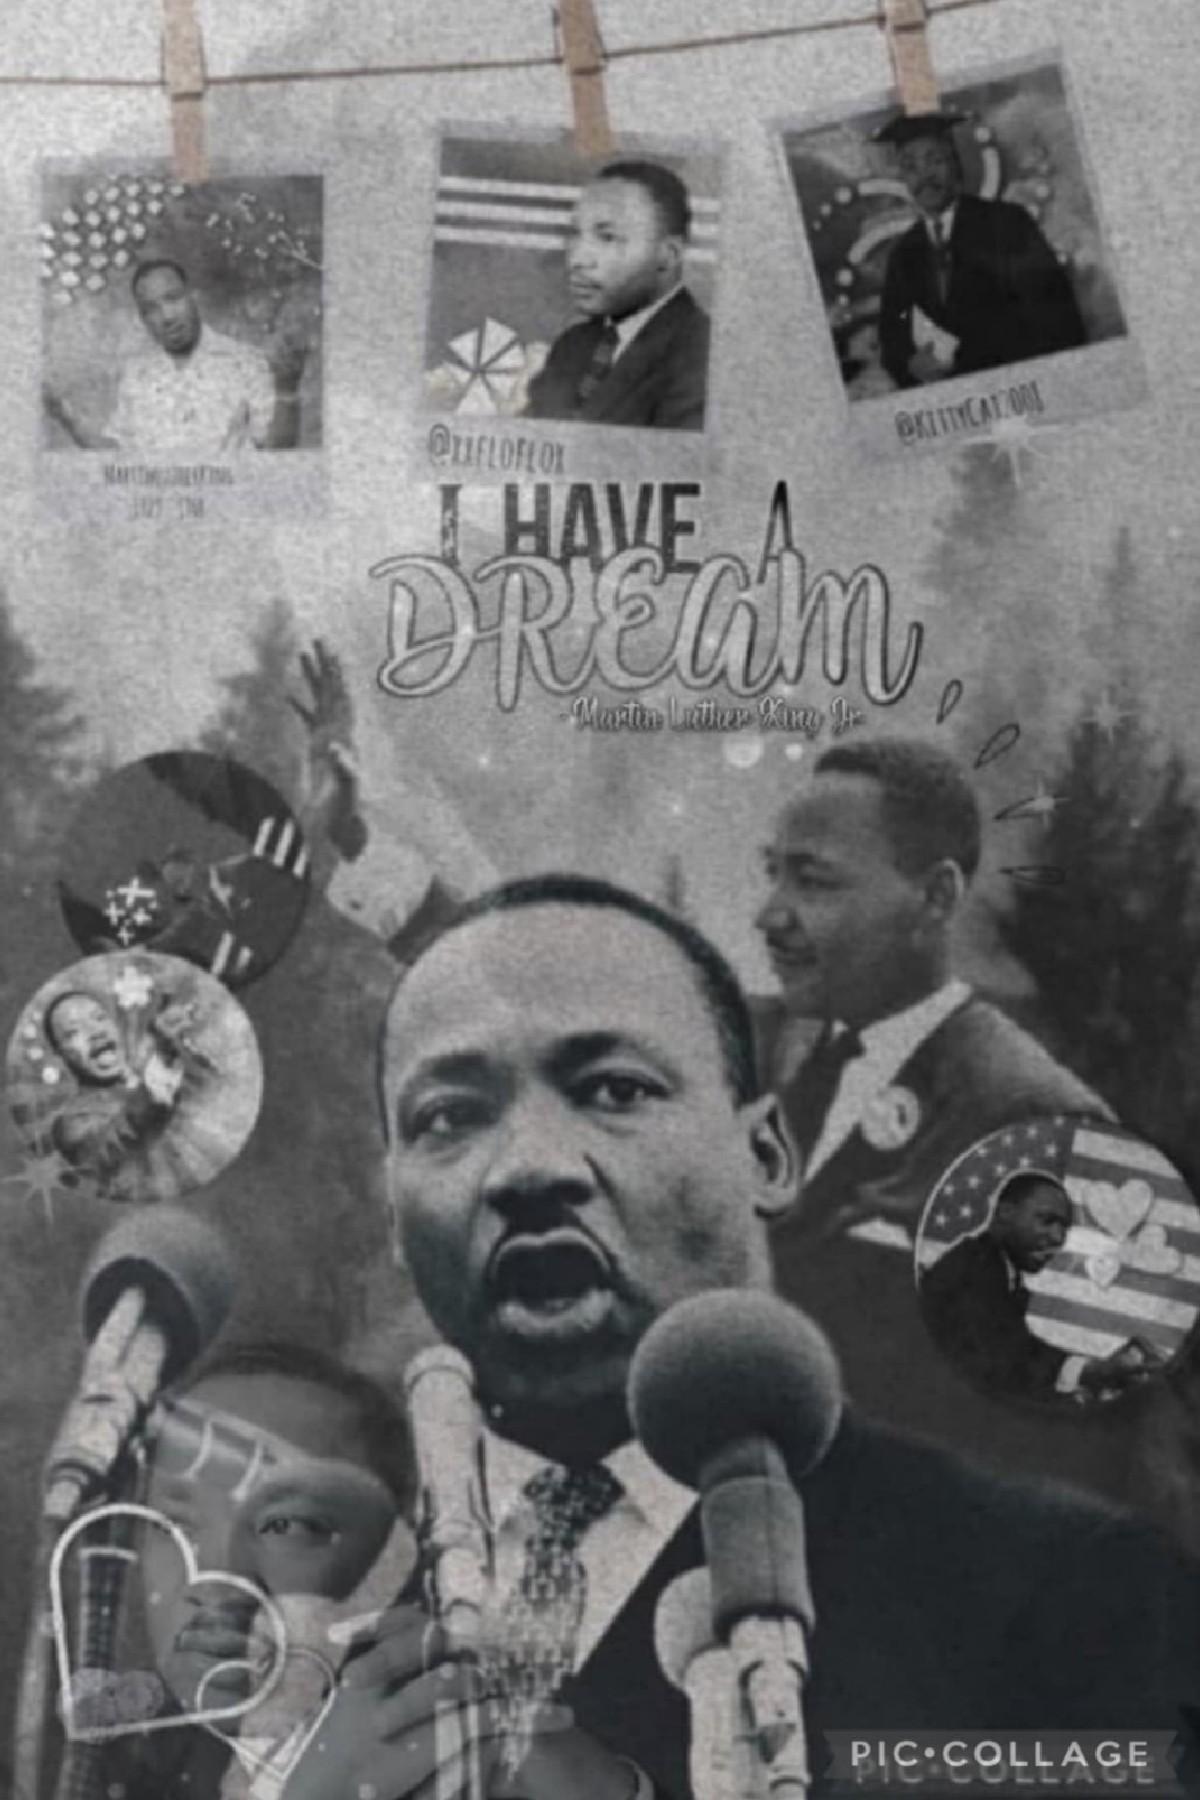 🖤🤍tap🤍🖤
🤍🖤Collab with the awesome..... KittyCat2008!🤍🖤
🤍Happy Martin Luther King Jr Day! 🤍
🖤BLMMMM!🖤